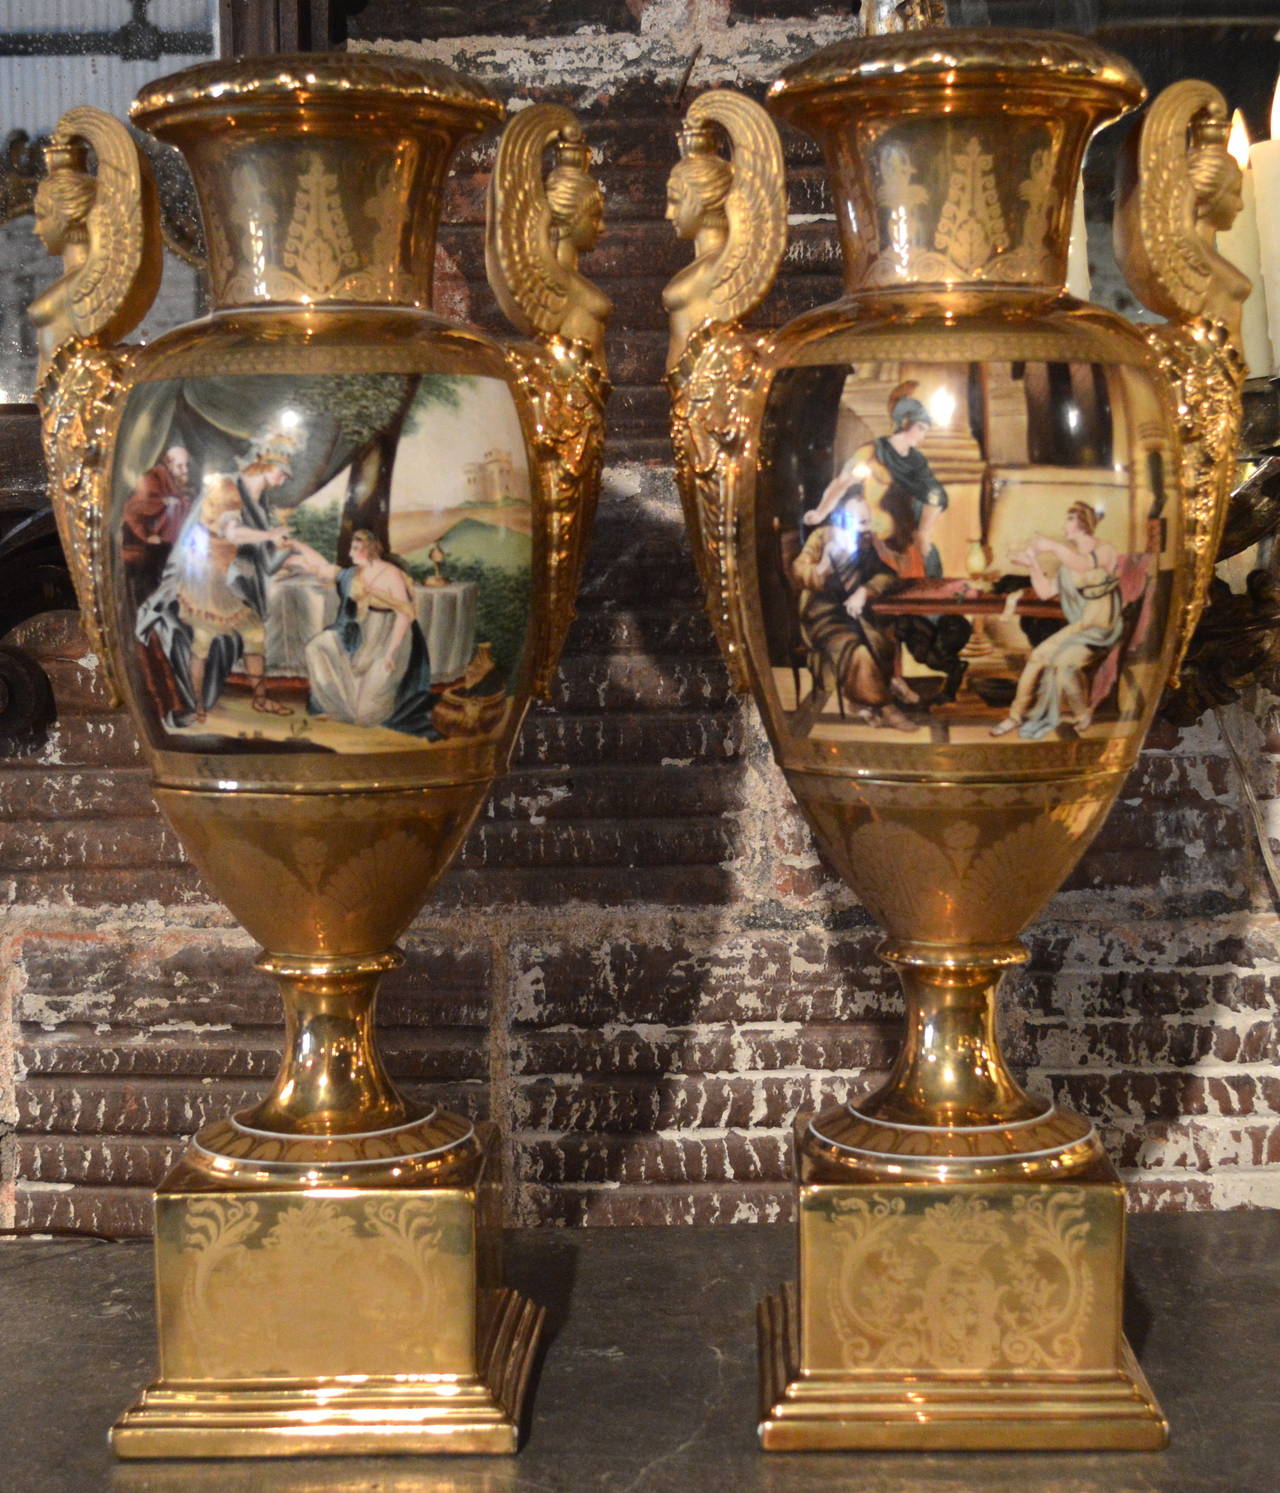 Pair of fine French neoclassical style porcelain baluster form vases with square plinth bases and applied winged classical female form handles, front-facing hand-painted paneled scenes of Romanesque classical figures with gilt overlay floral